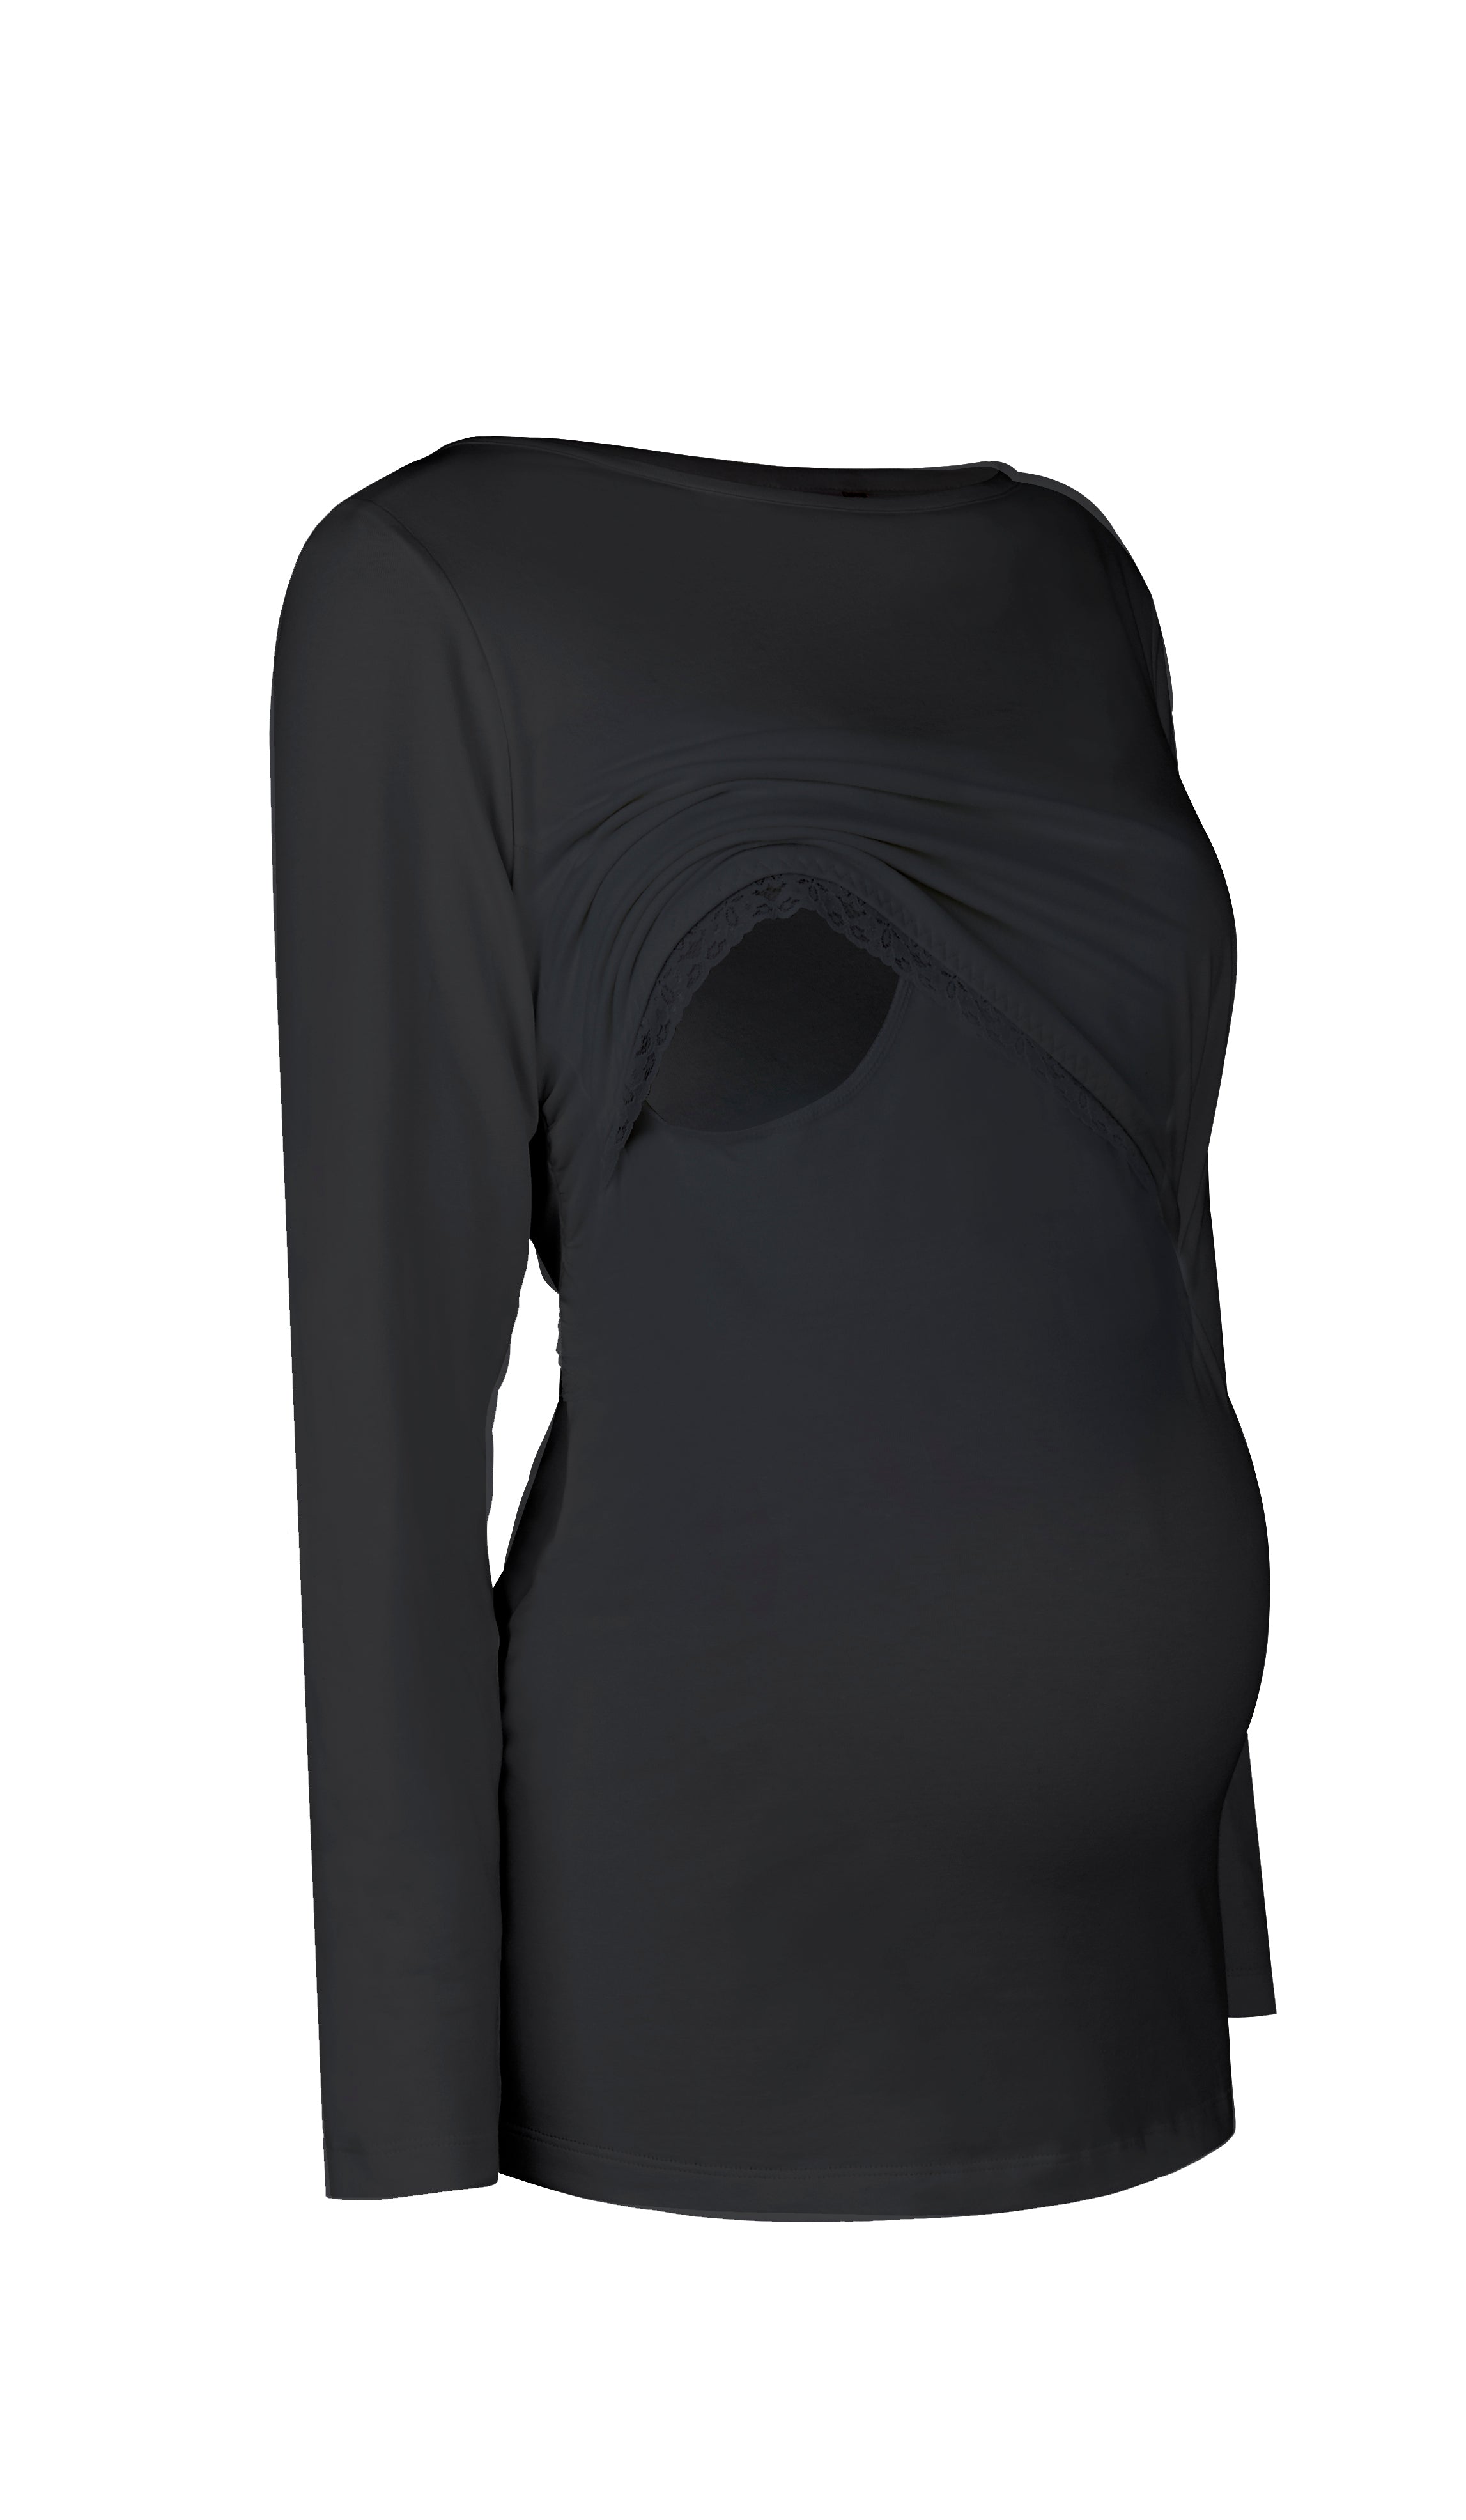 Bshirt Nursing long sleeve t-shirt (with lace) in Black